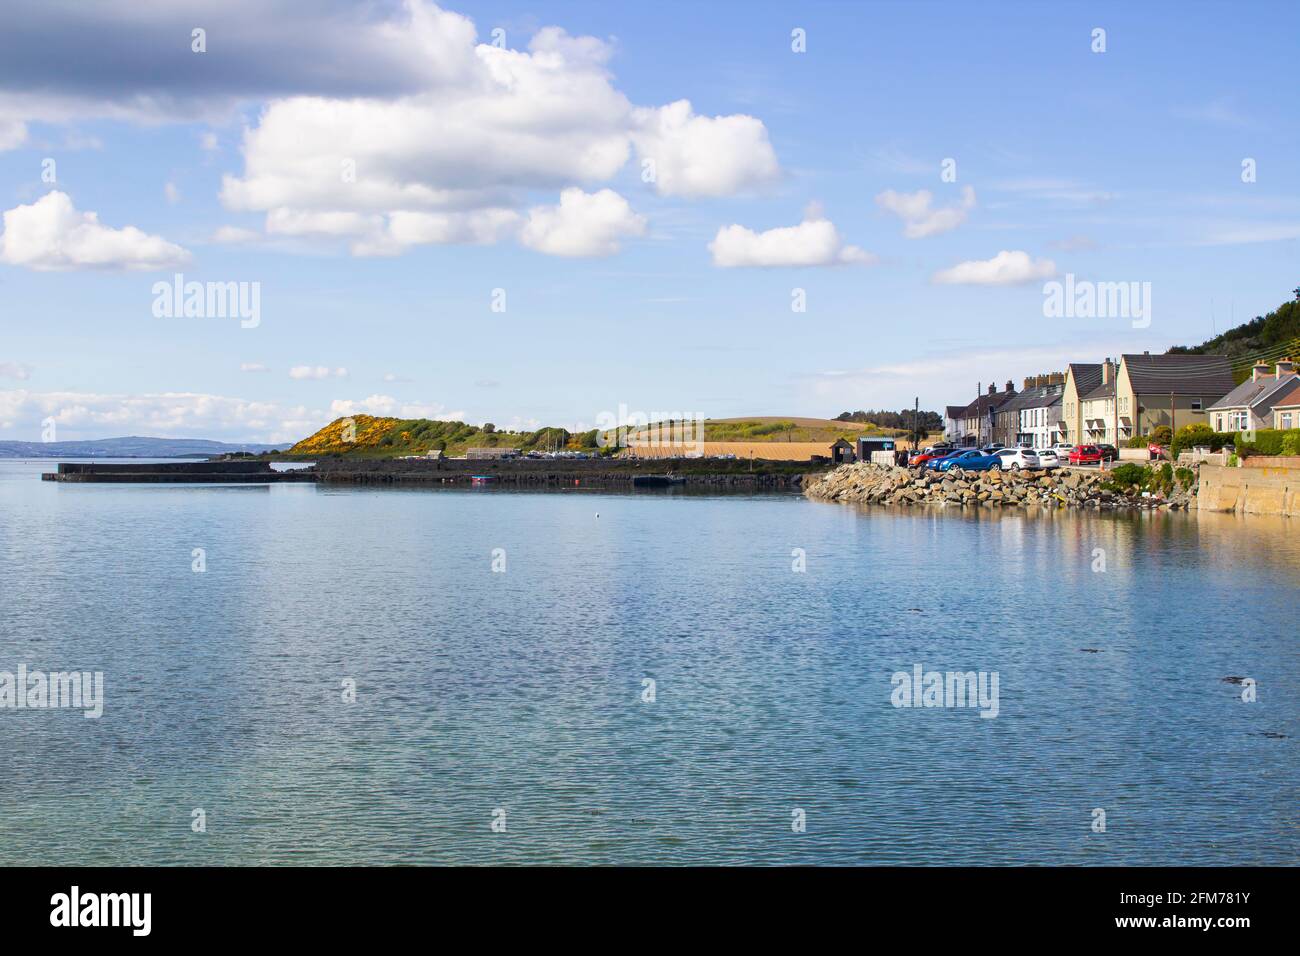 29 April 2021 A view of the small harbour at Kircubbin on Strangford Lough in County Down Northern Ireland. The viillage is located on the western sid Stock Photo